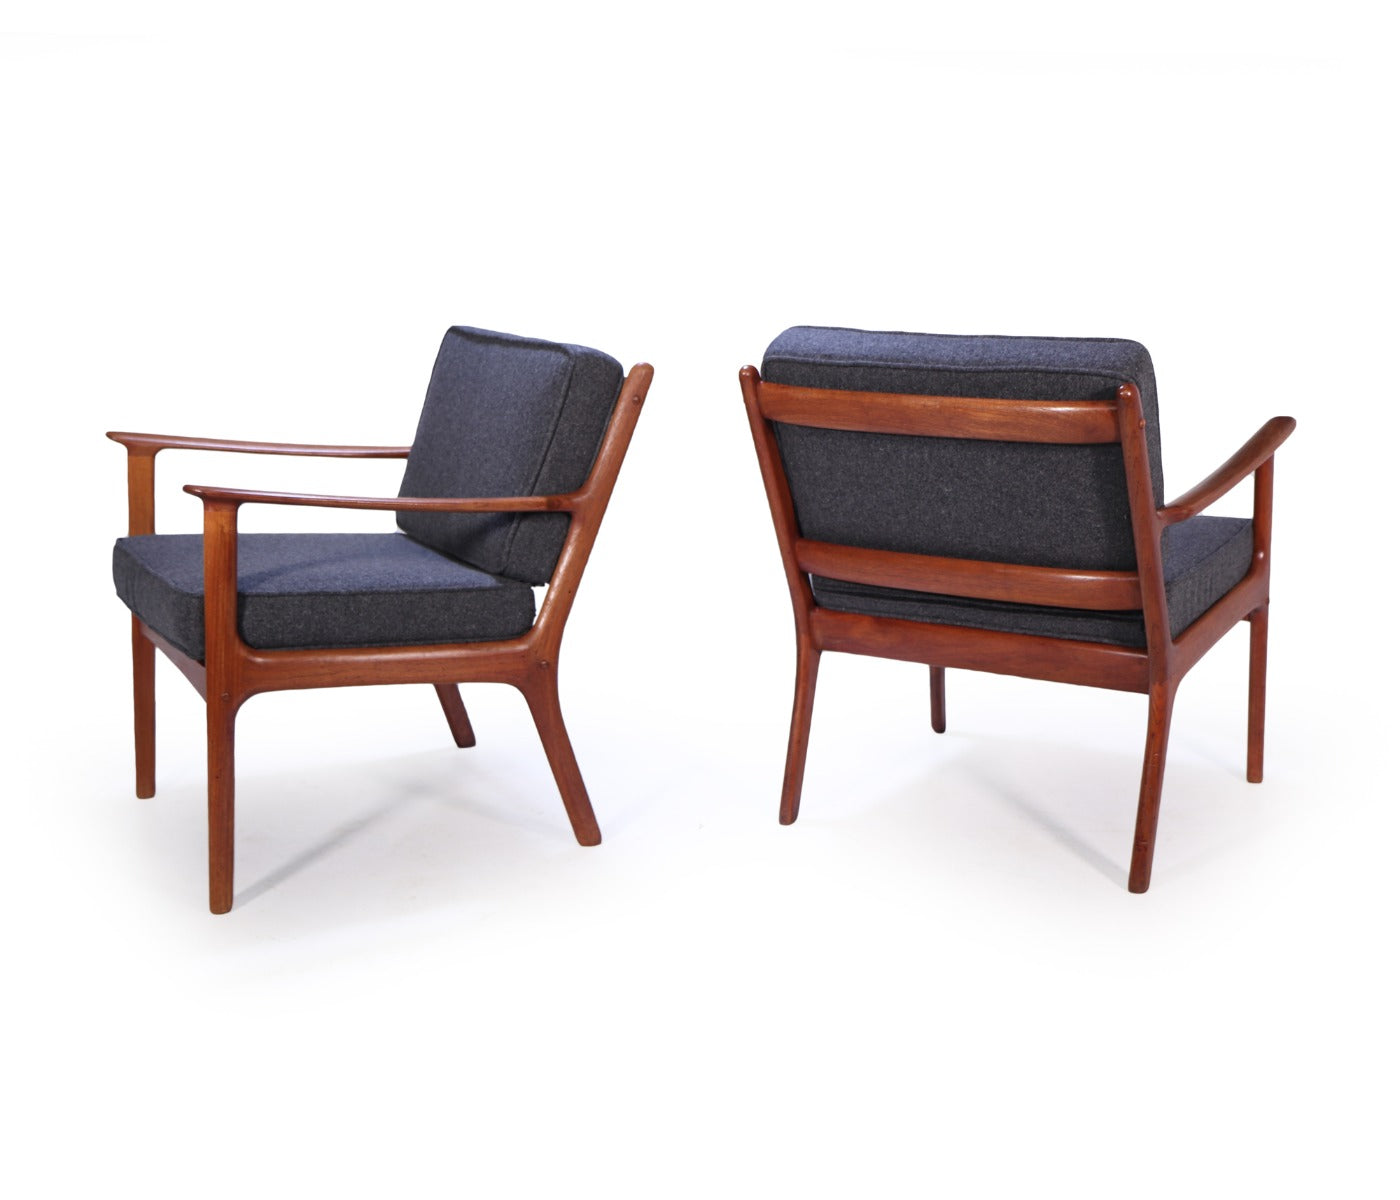 Pair of Mid Century Teak Lounge Chairs by Ole Wanscher